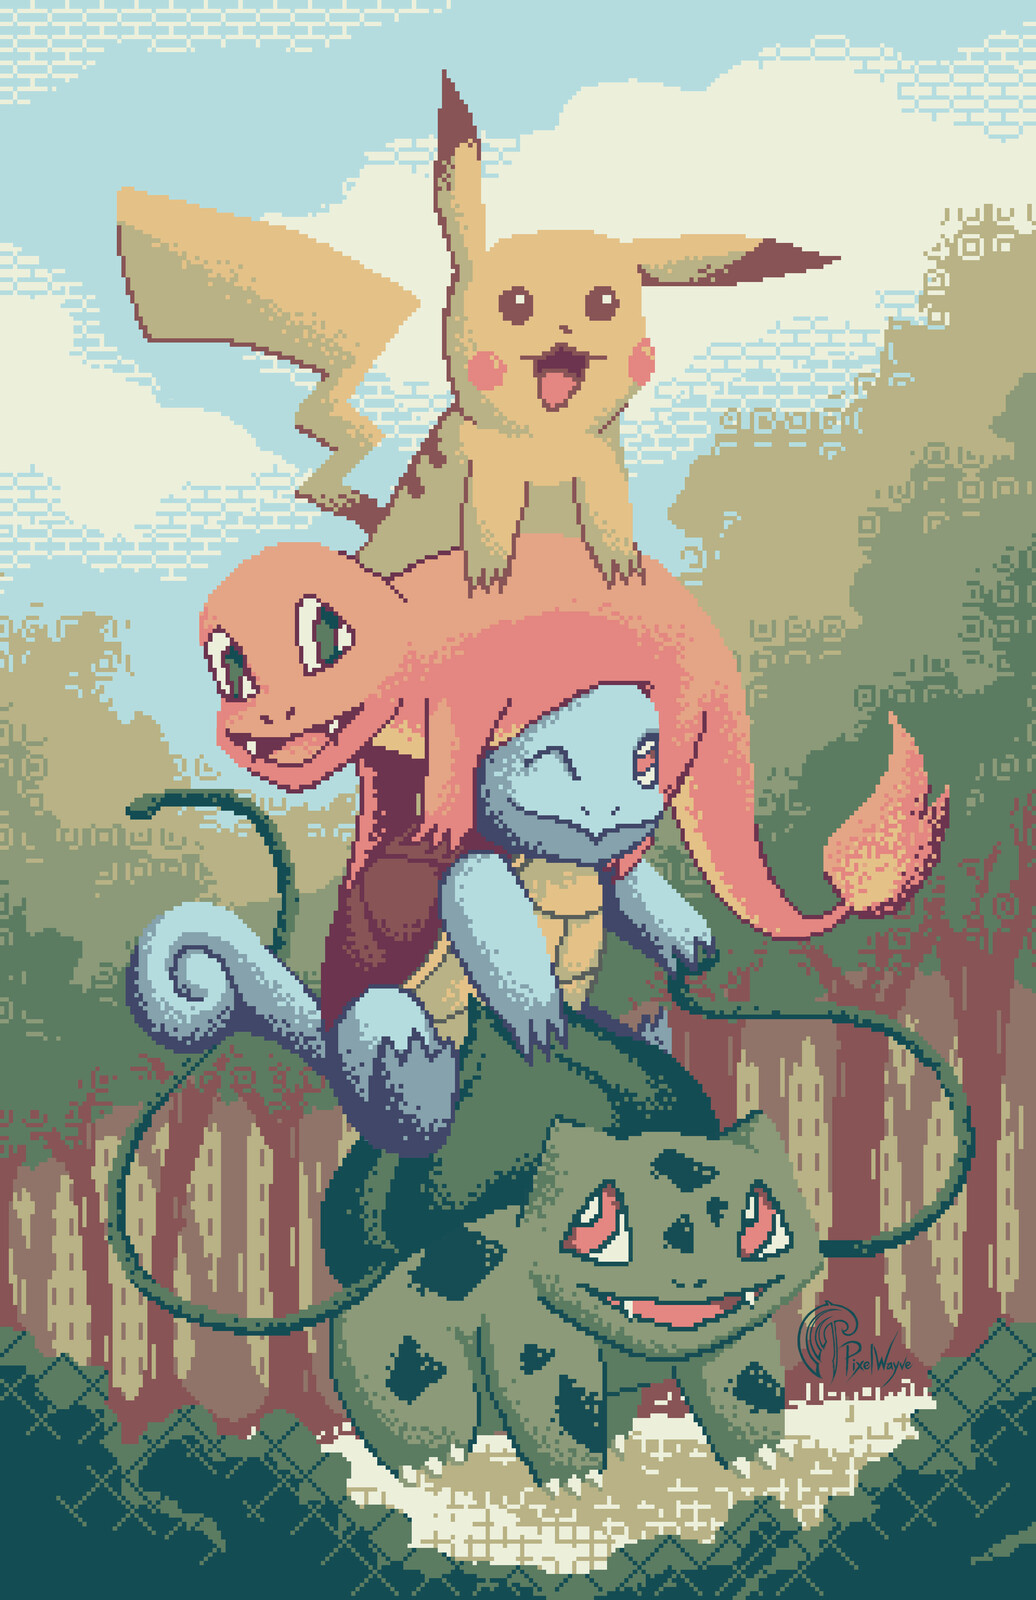 Pikachu, Charmander, Squirtle, and Bulbasaur from Pokemon